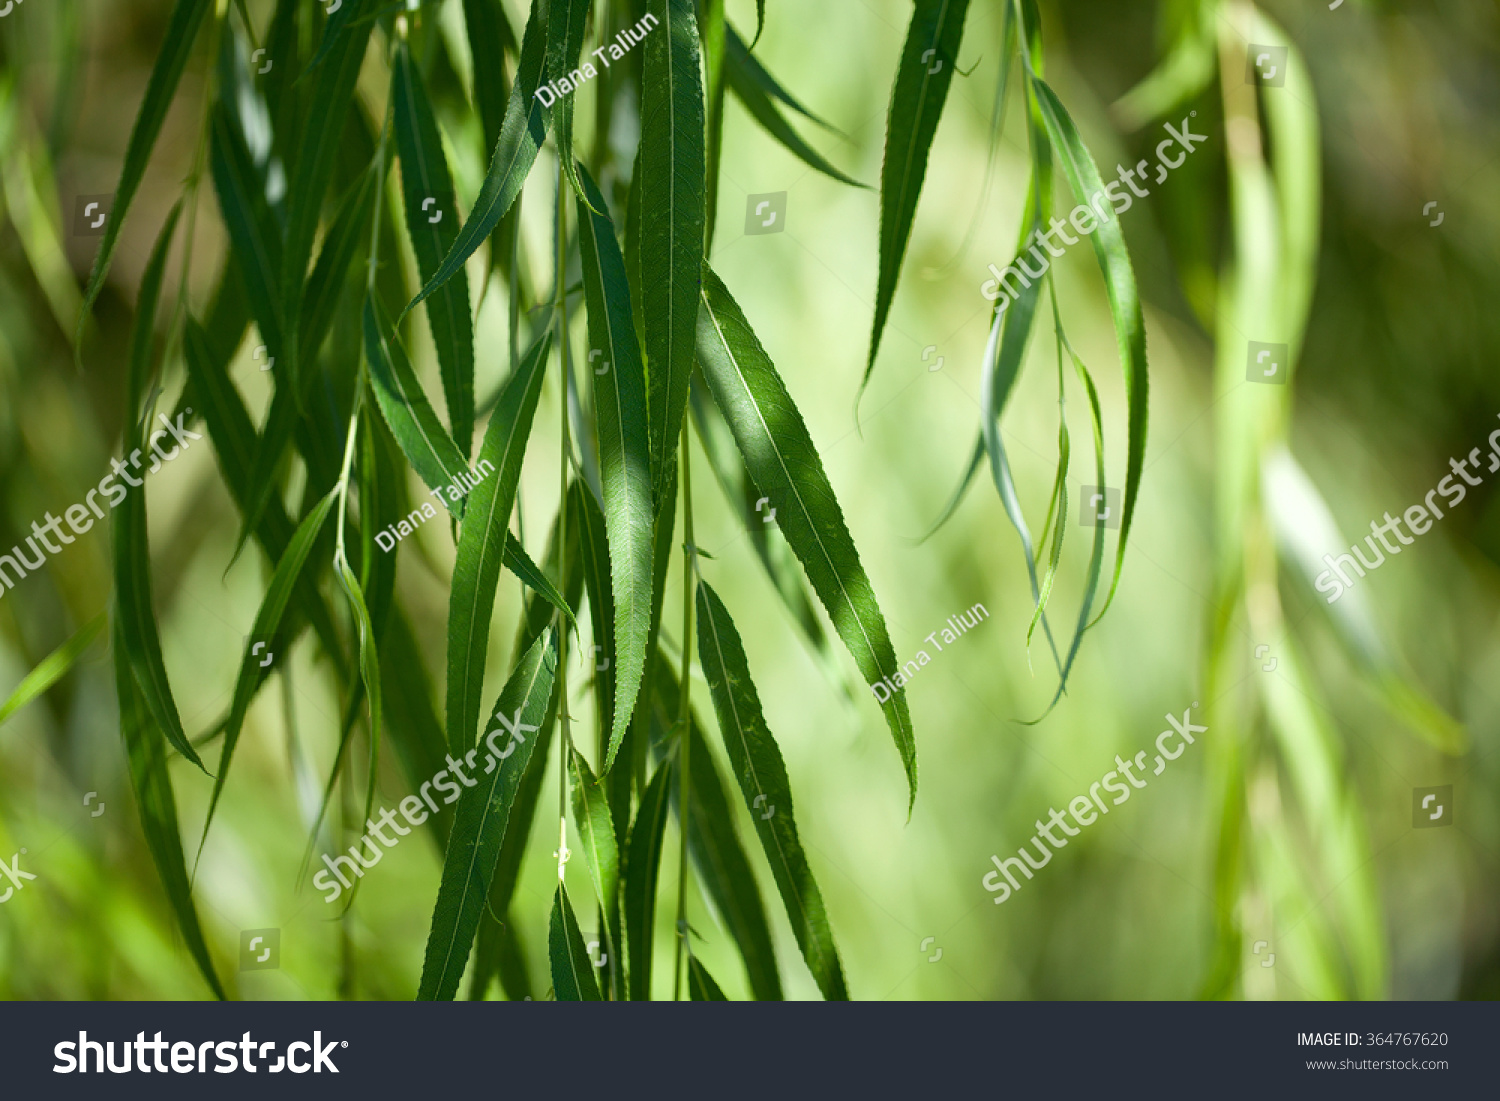 Weeping Willow Background Stock Photo 364767620 : Shutterstock